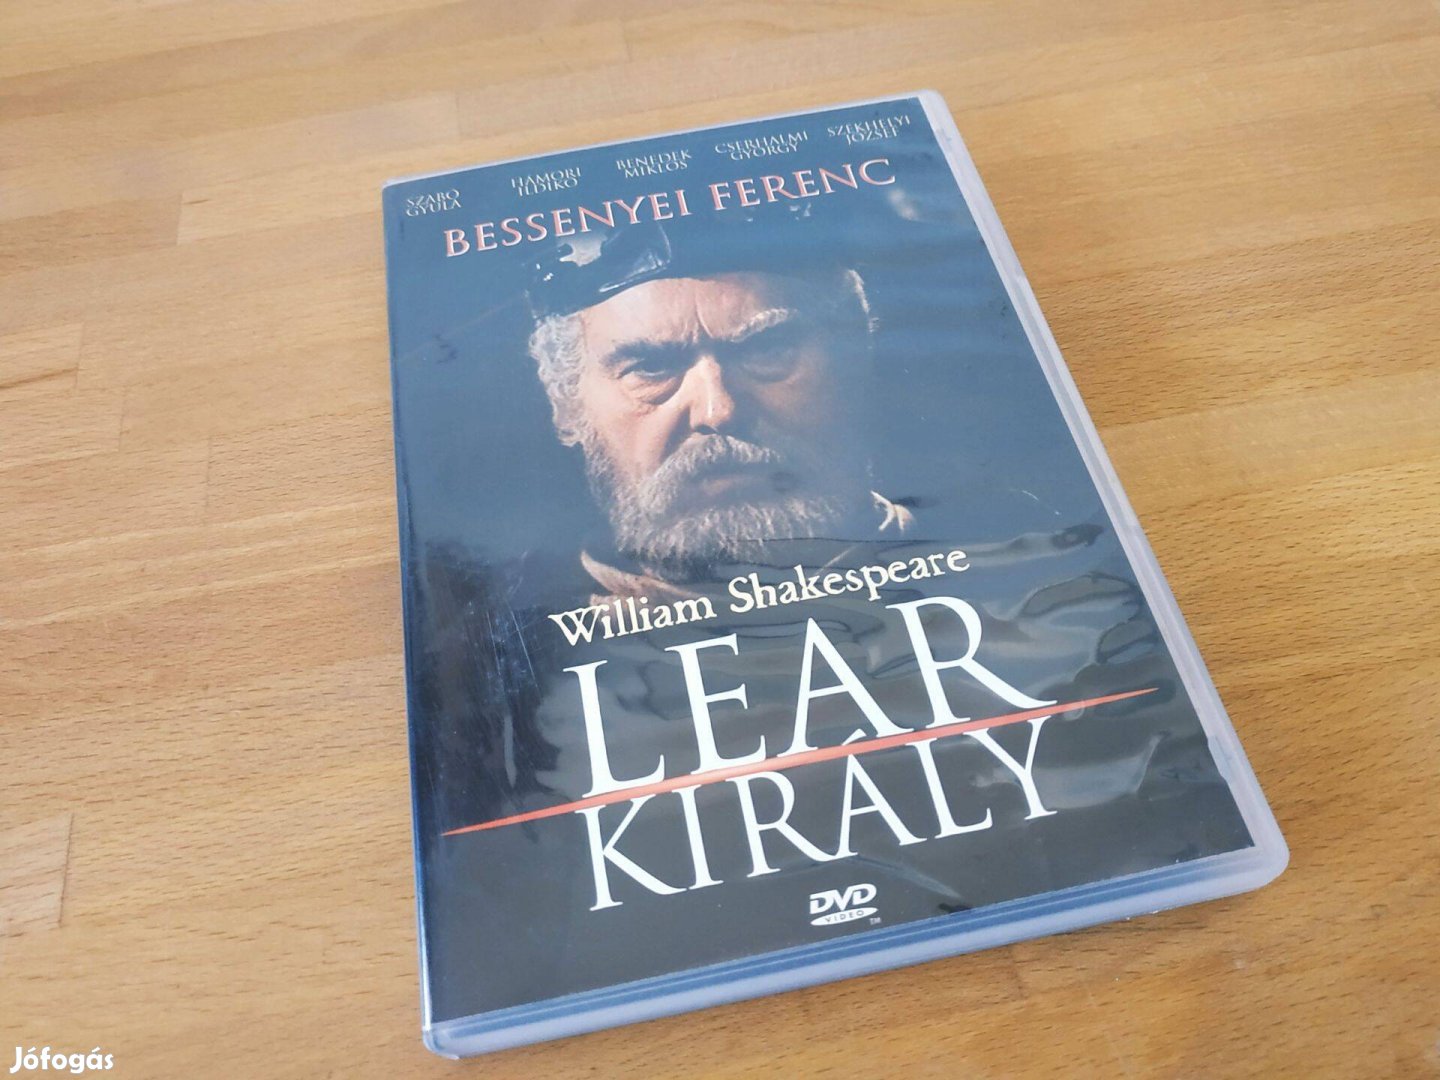 Shakespeare - Lear király - Bessenyei Ferenc (Europa Records,156p,DVD)